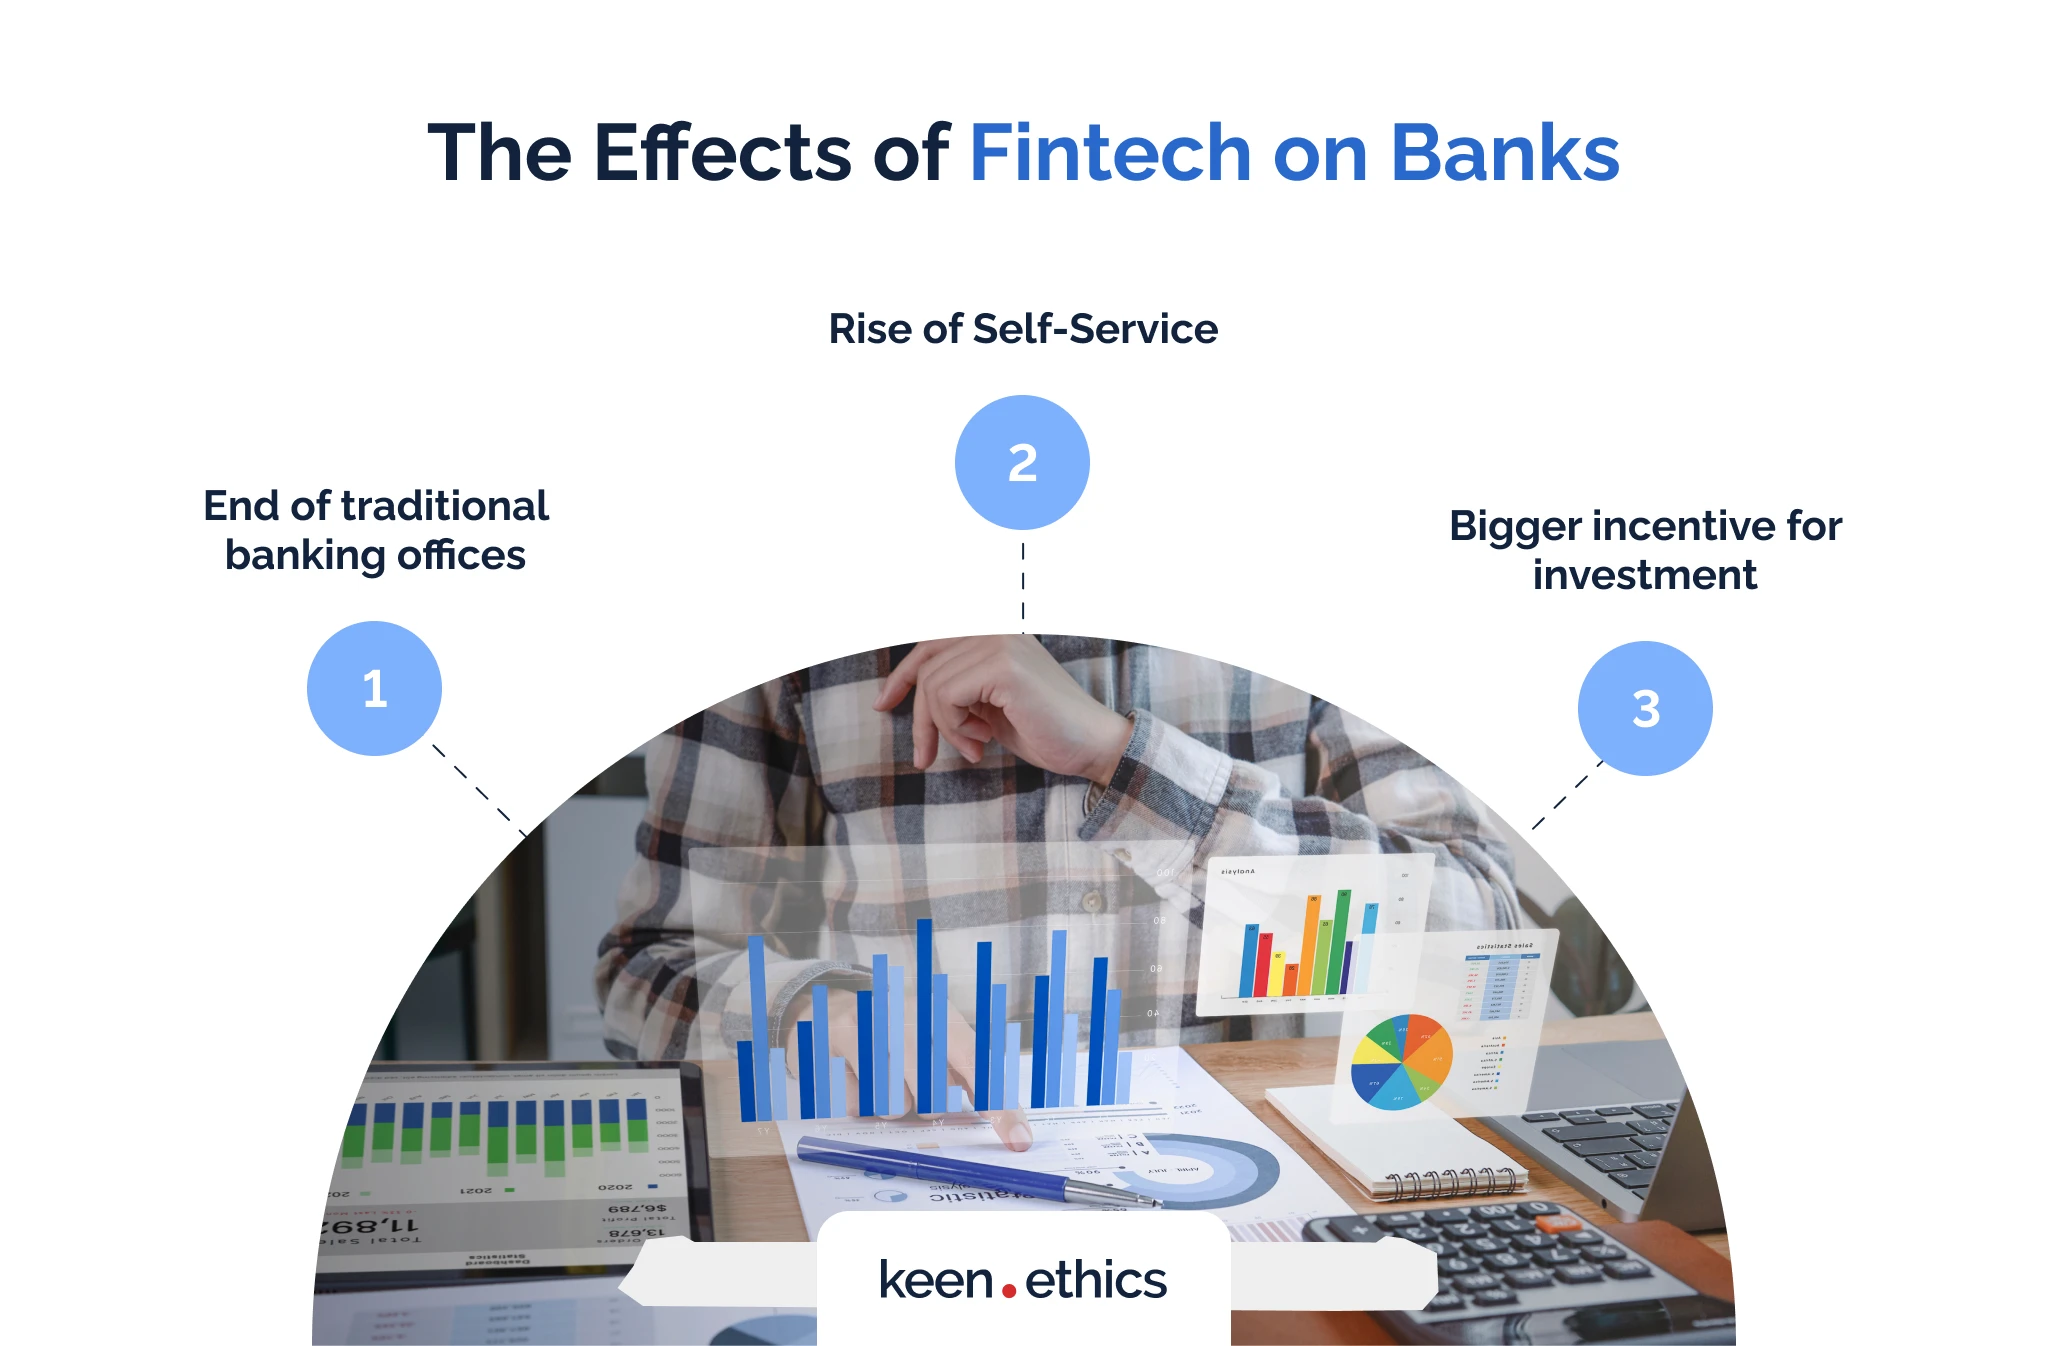 The effects of fintech on banks